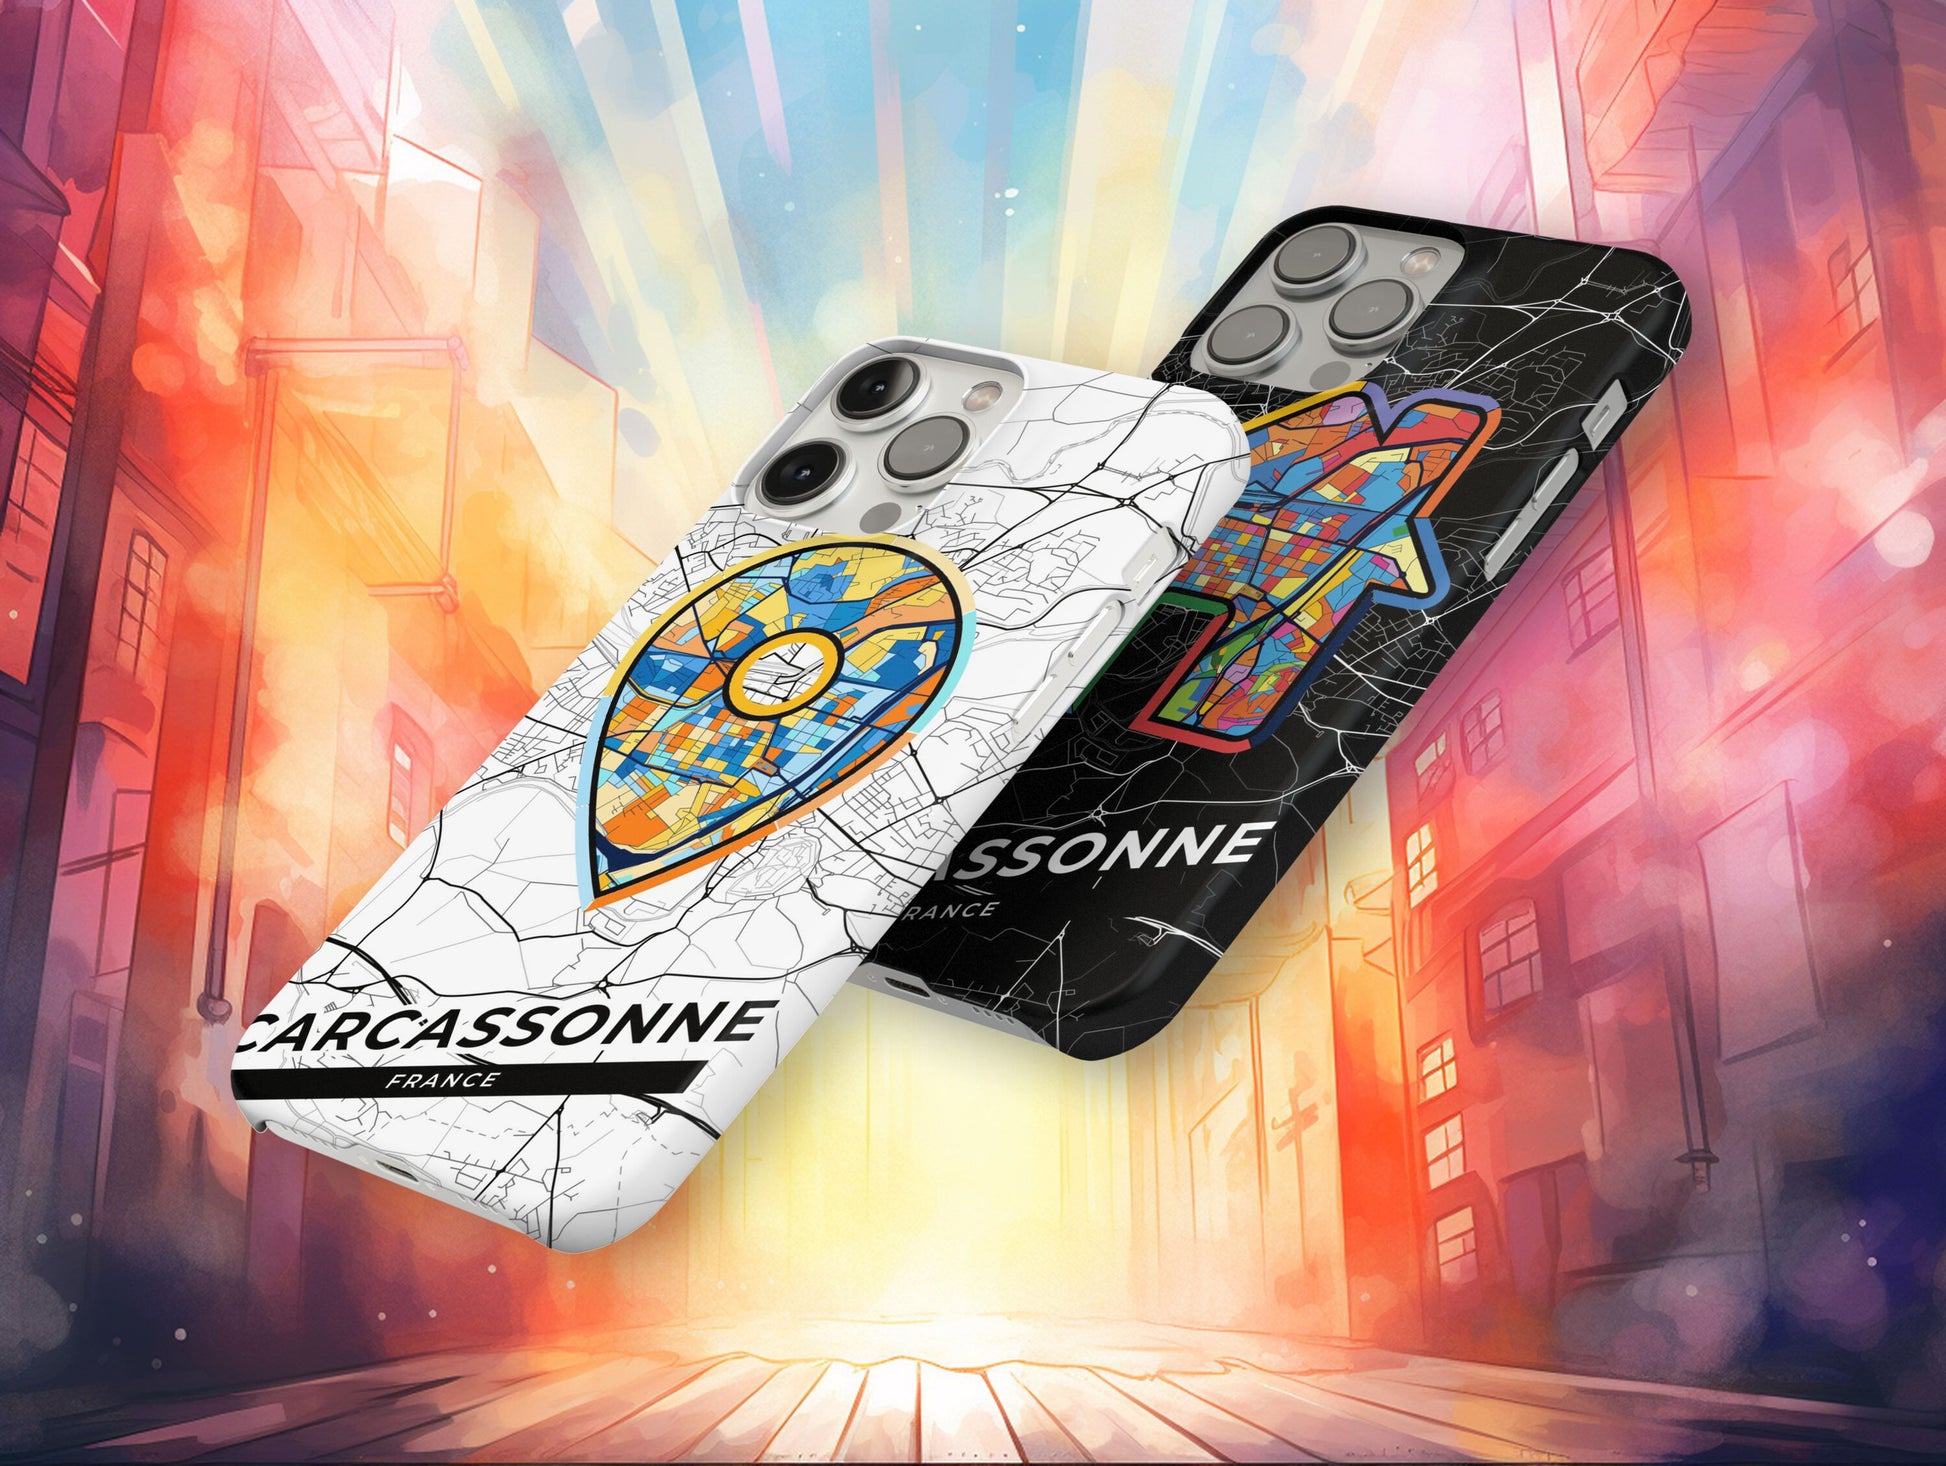 Carcassonne France slim phone case with colorful icon. Birthday, wedding or housewarming gift. Couple match cases.